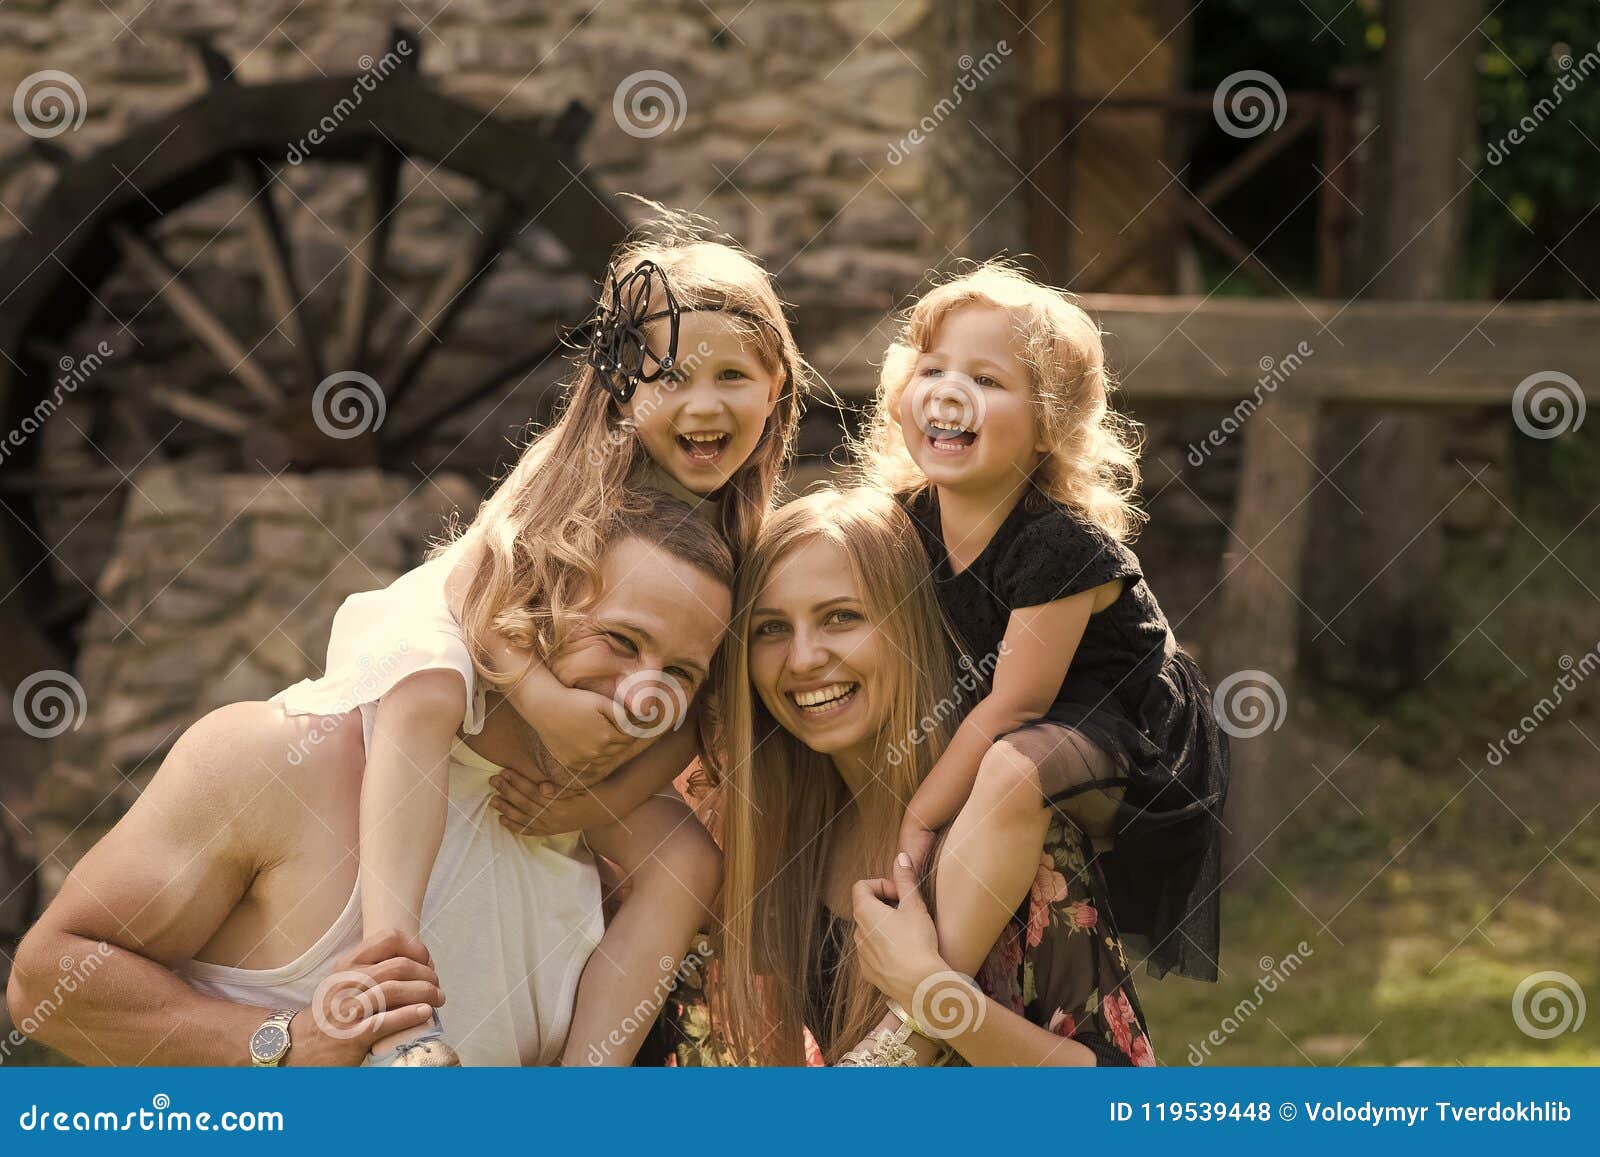 summer vacation, adventure, discovery, wanderlust concept. happy childhood, family, love